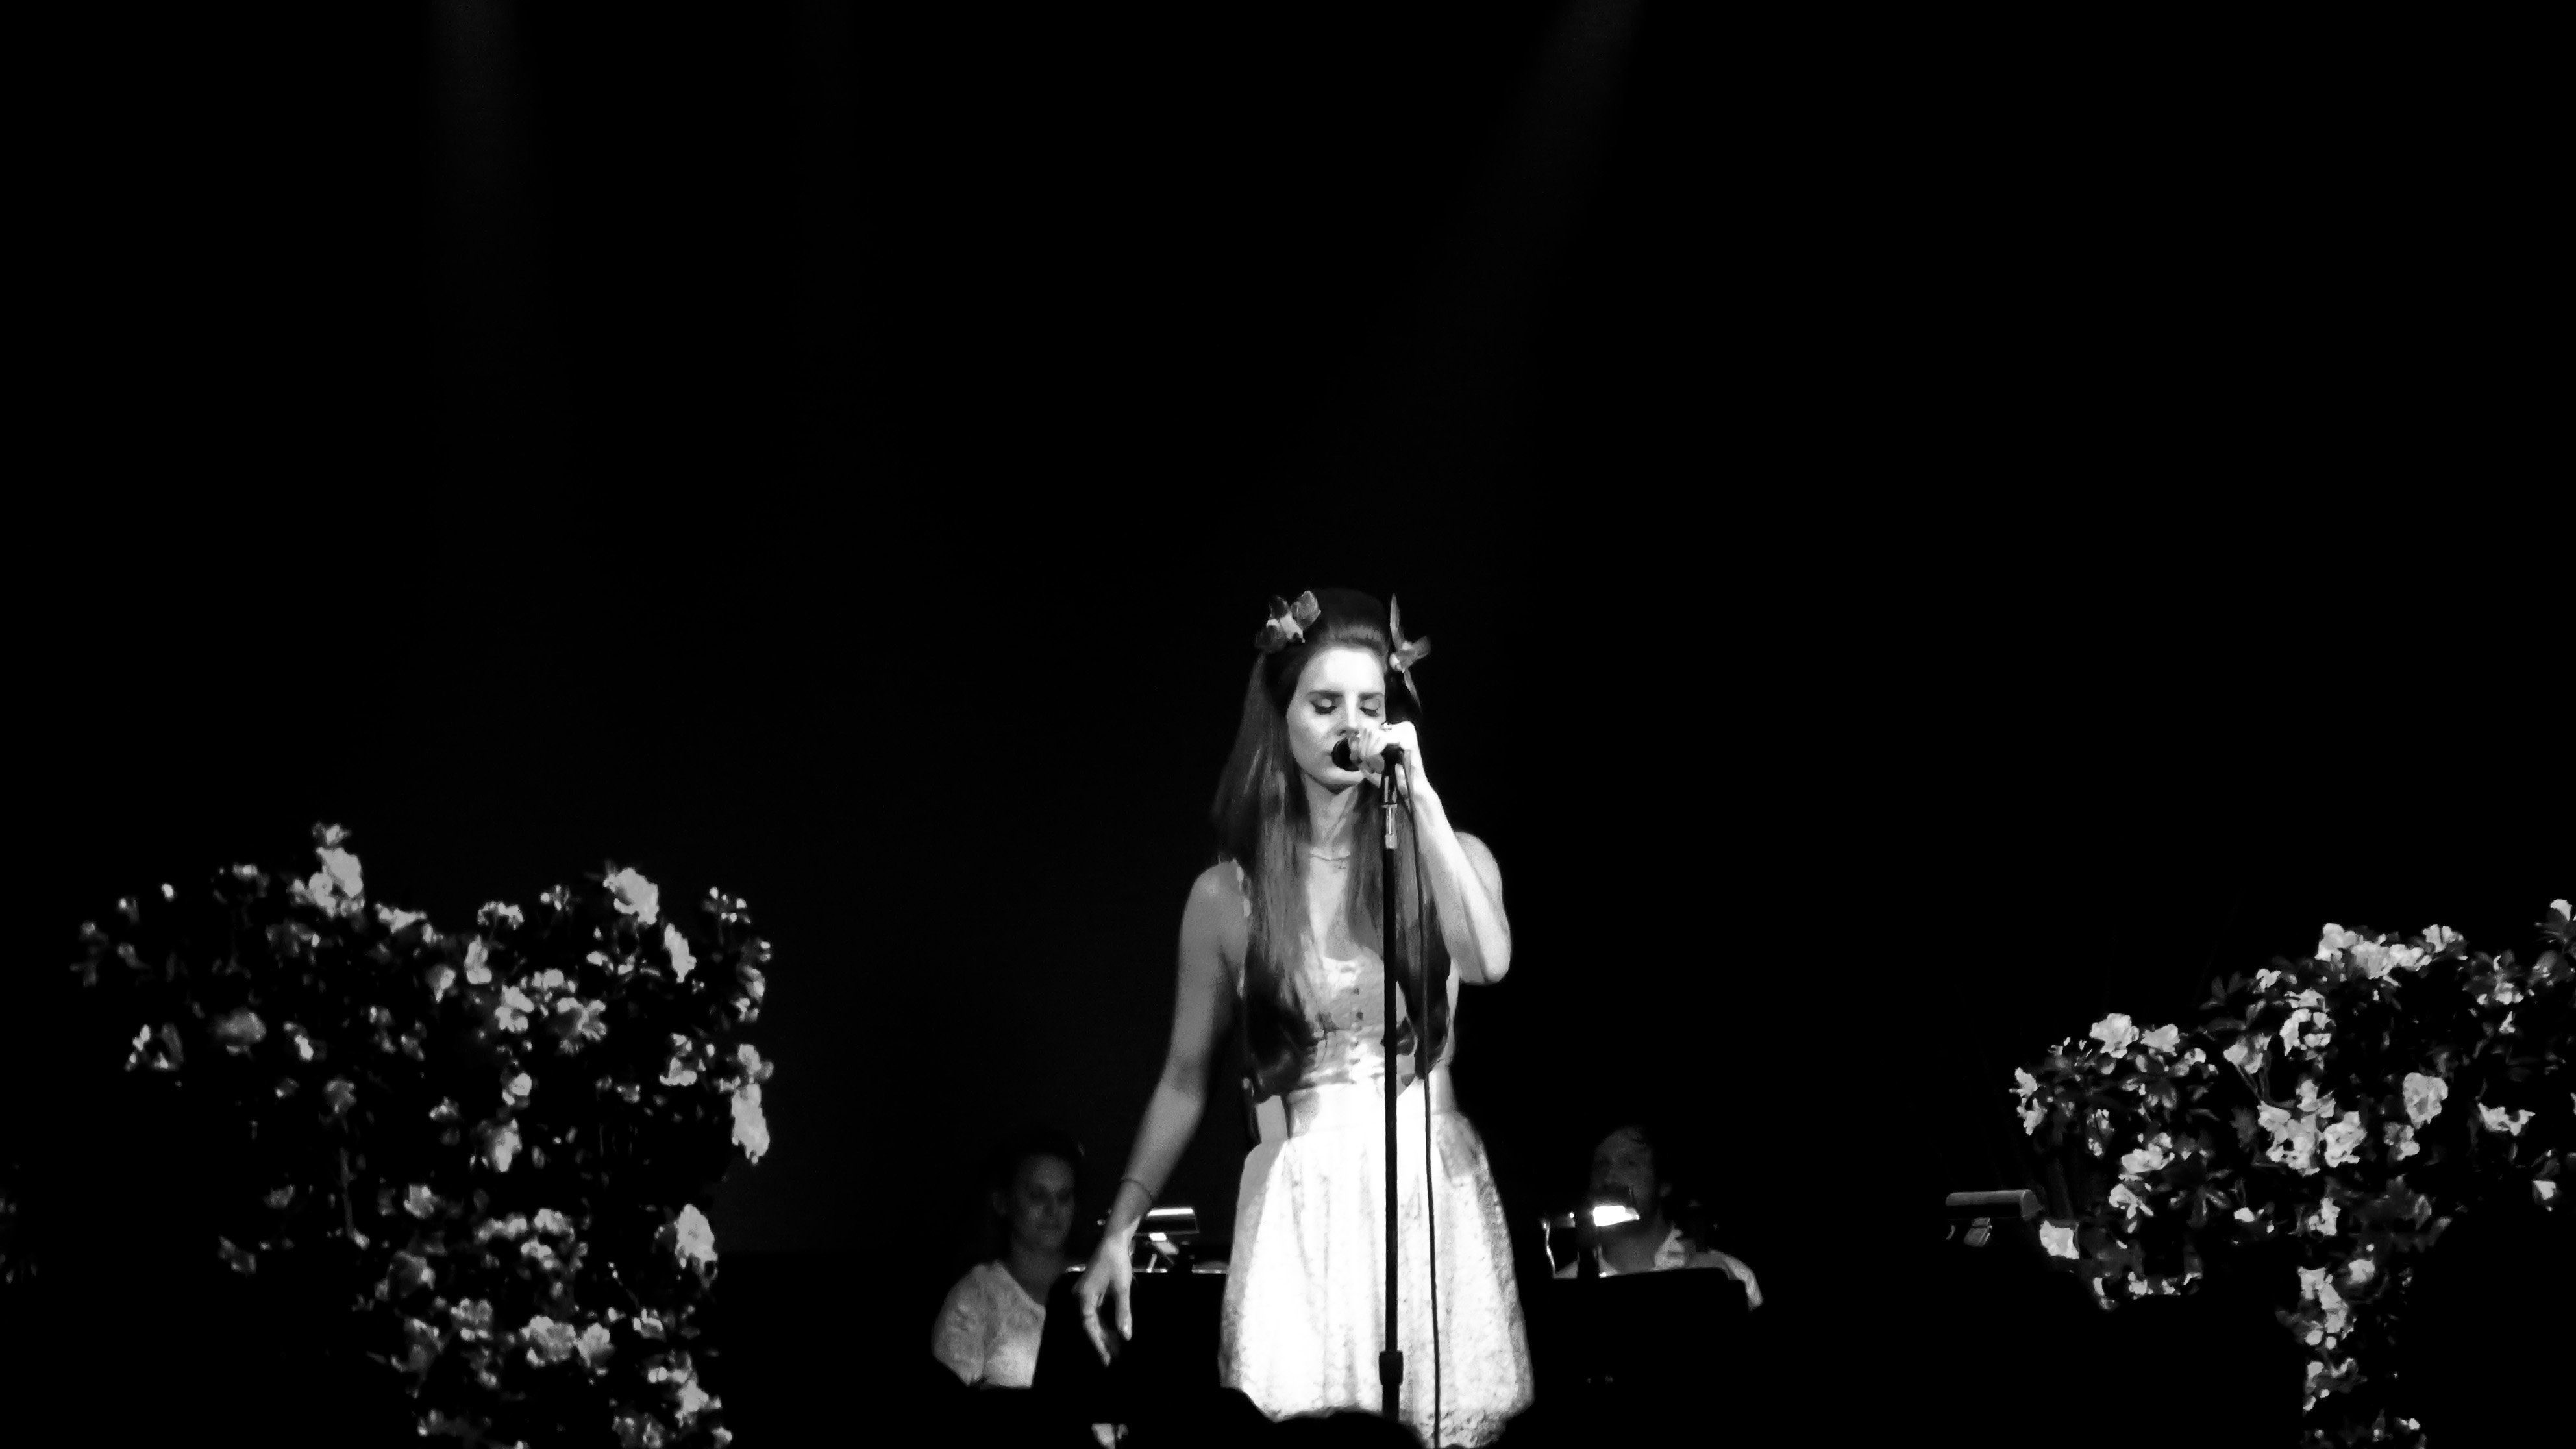 A woman in white dress singing on stage - Lana Del Rey